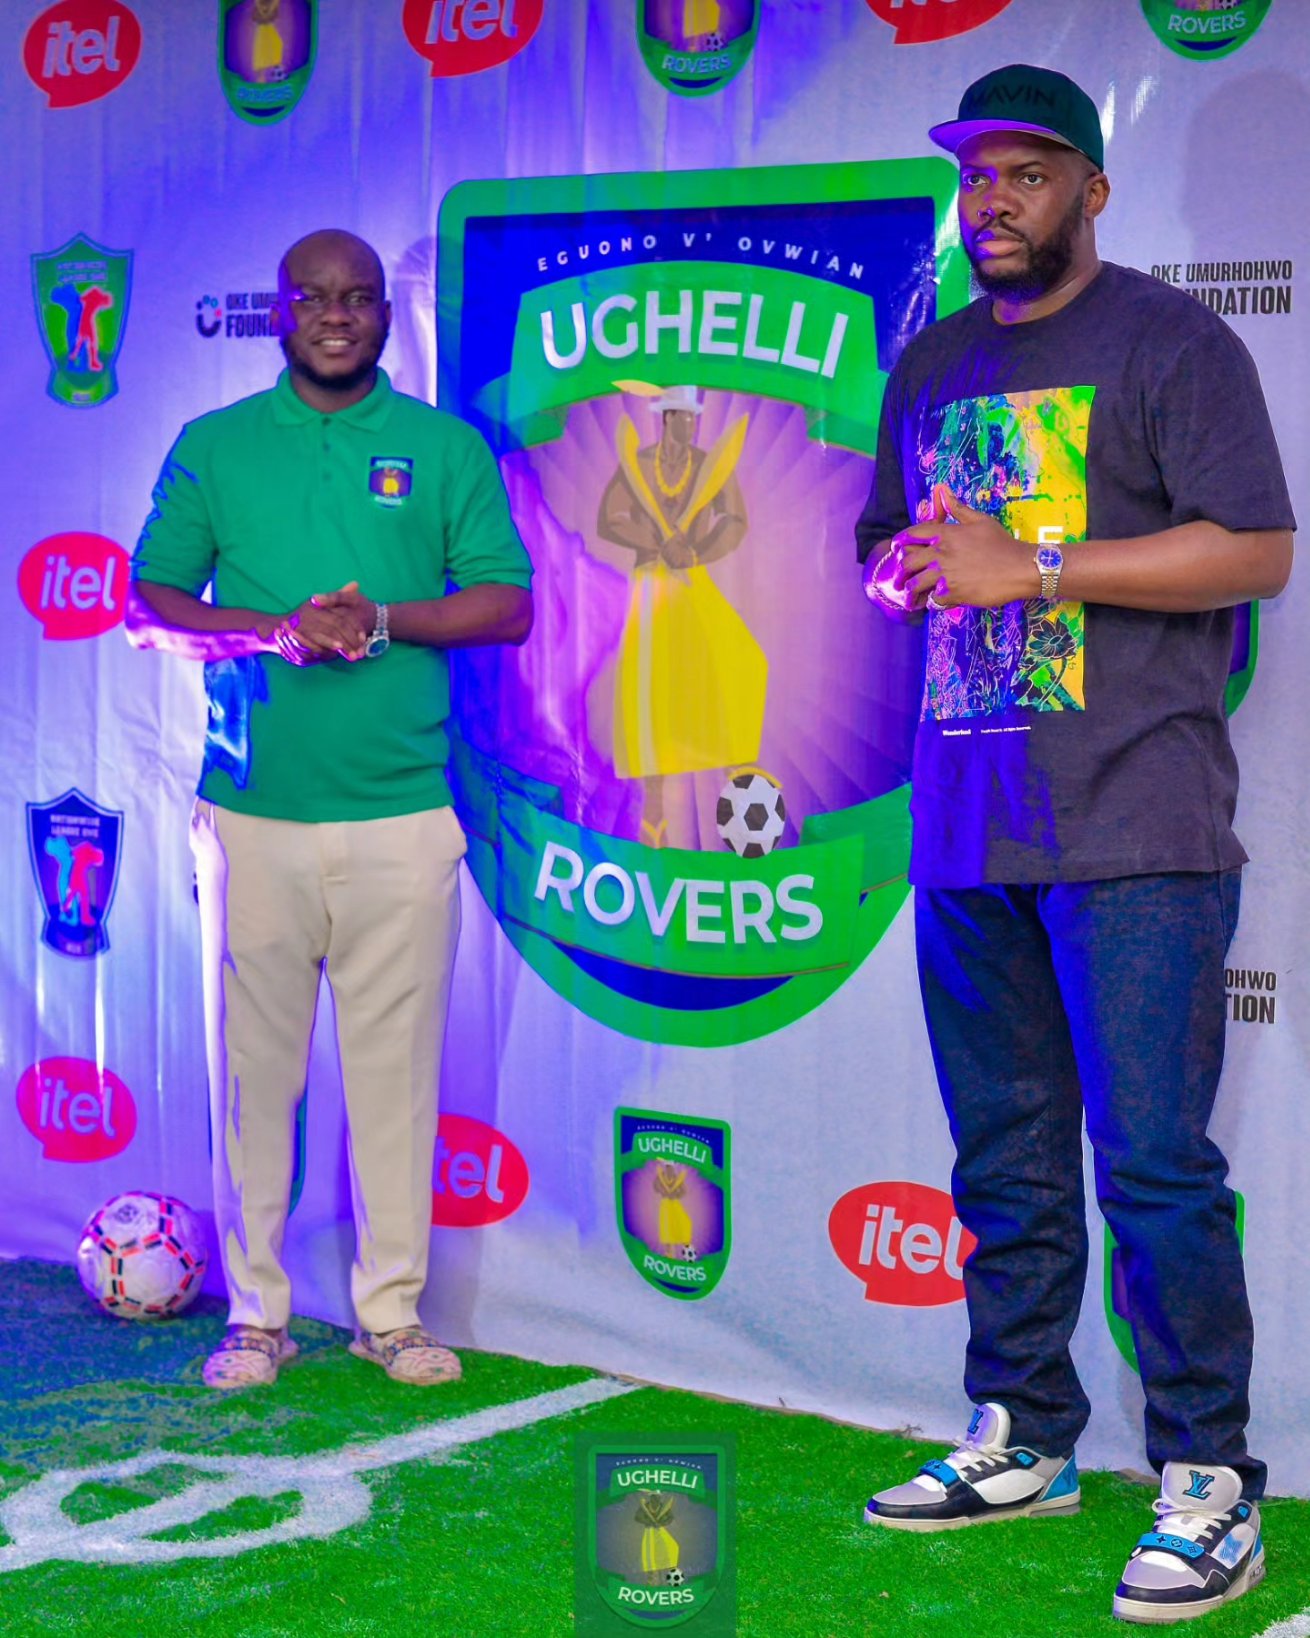 Ughelli Rovers Football Club was recently officially unveiled